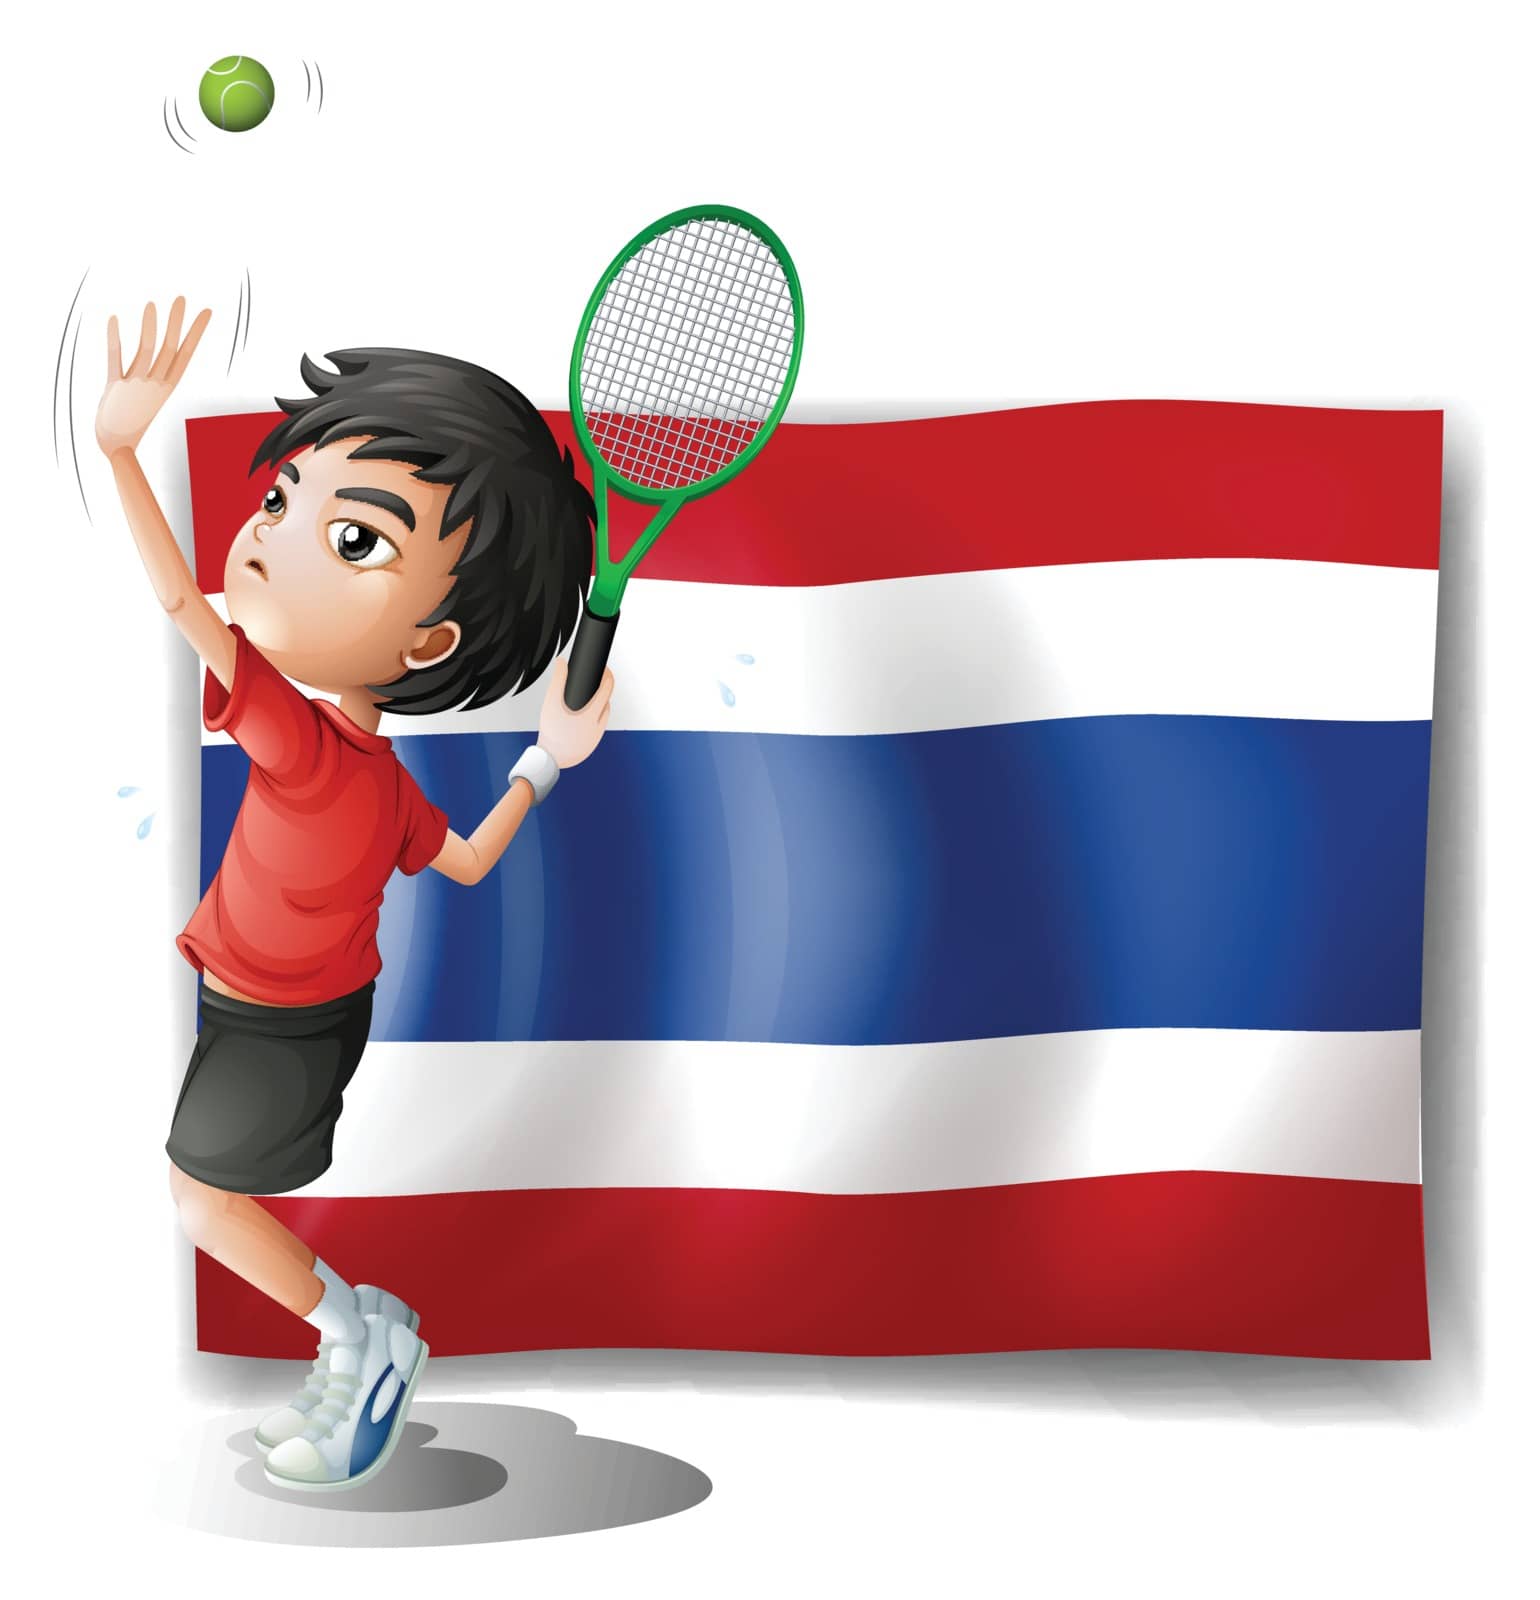 Illustration of an athlete in front of the Thailand flag on a white background